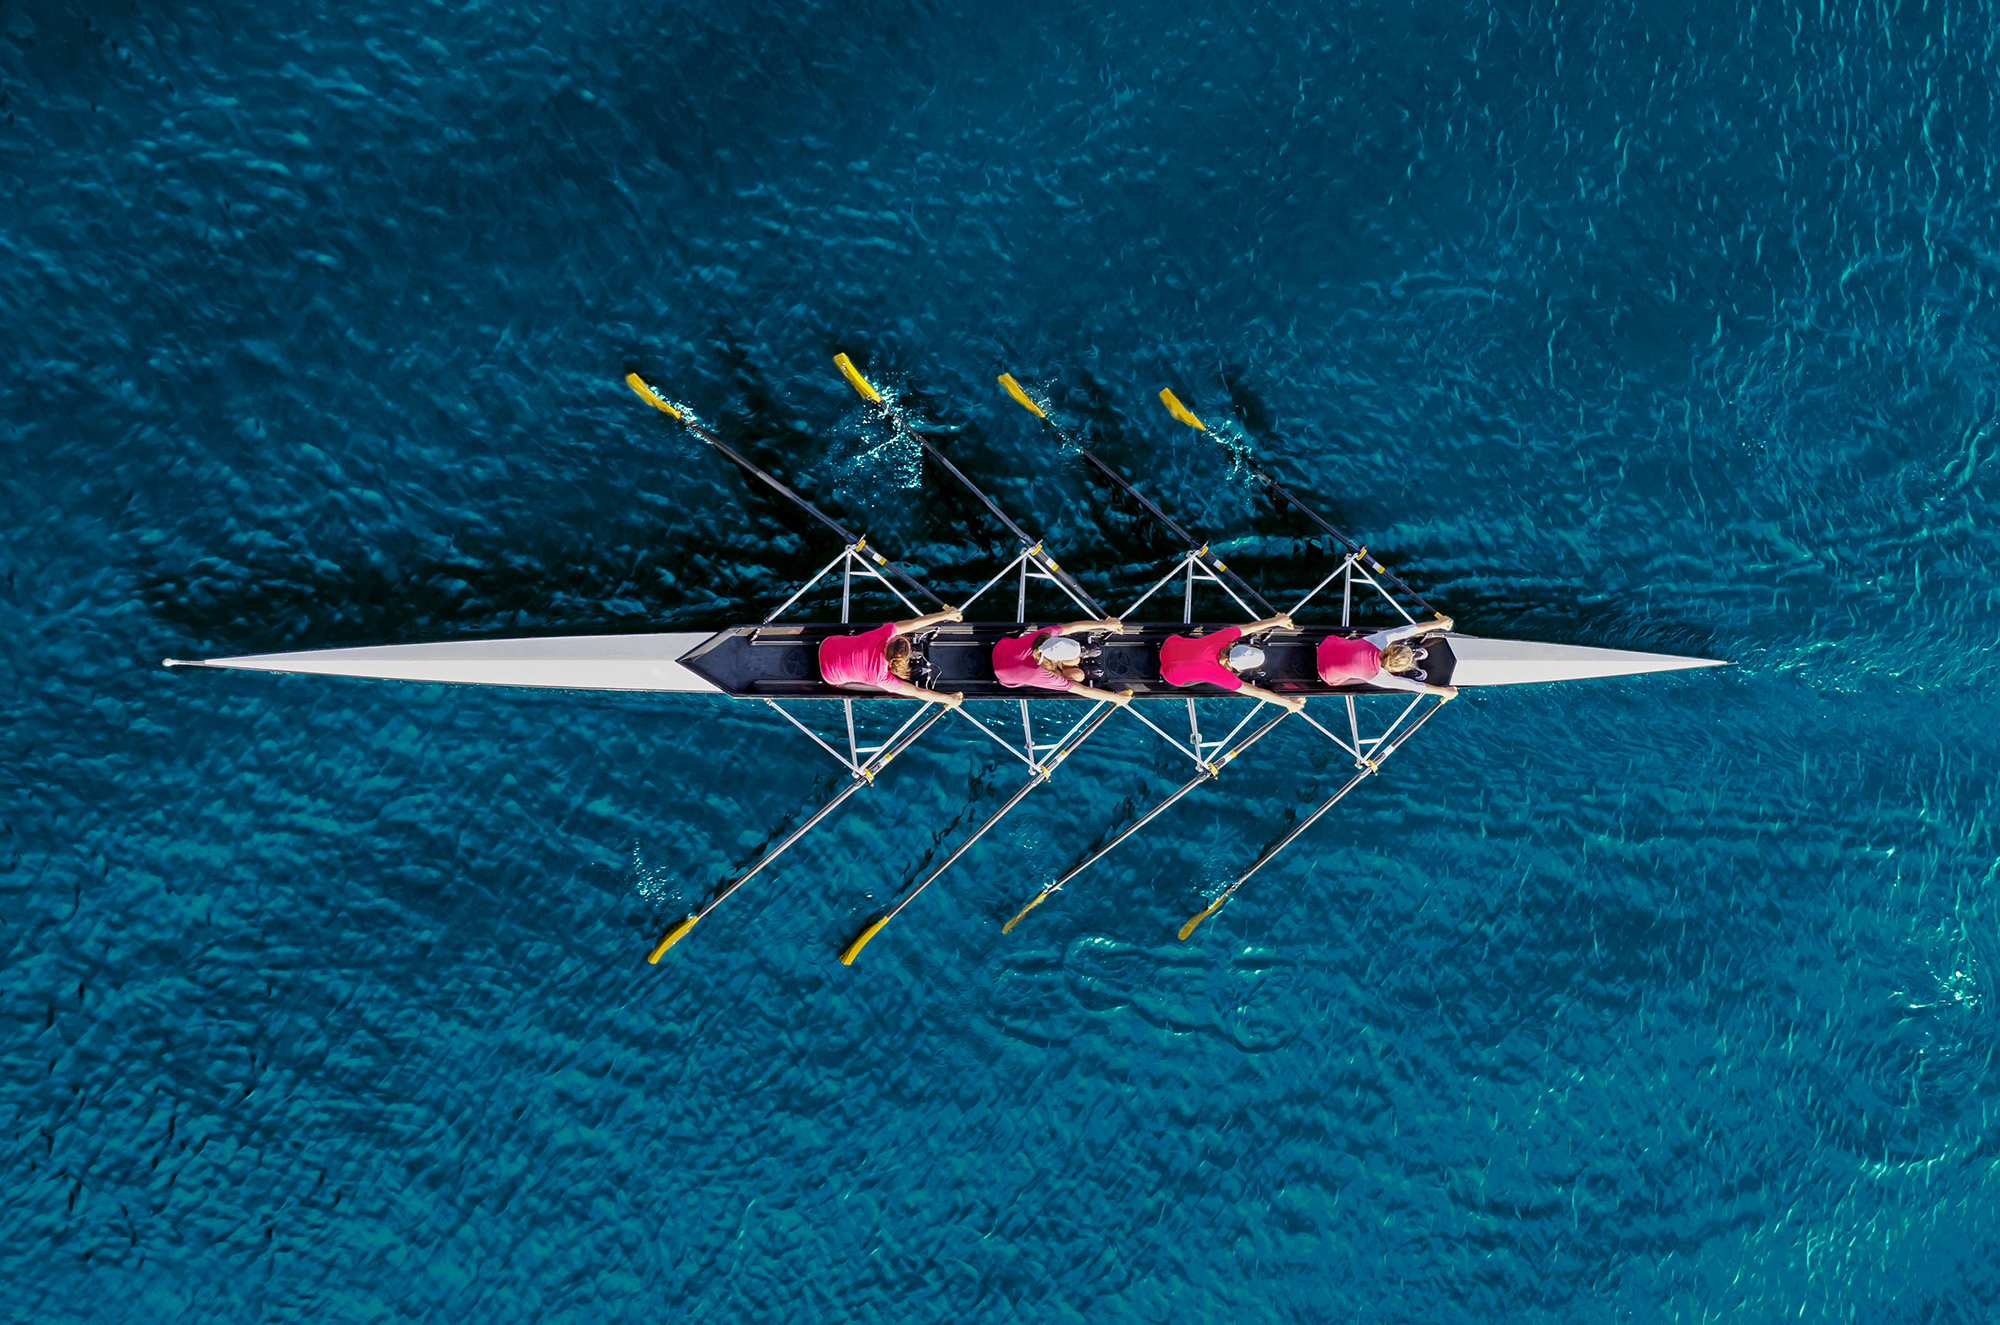 A rowing team navigates water working together as a team.